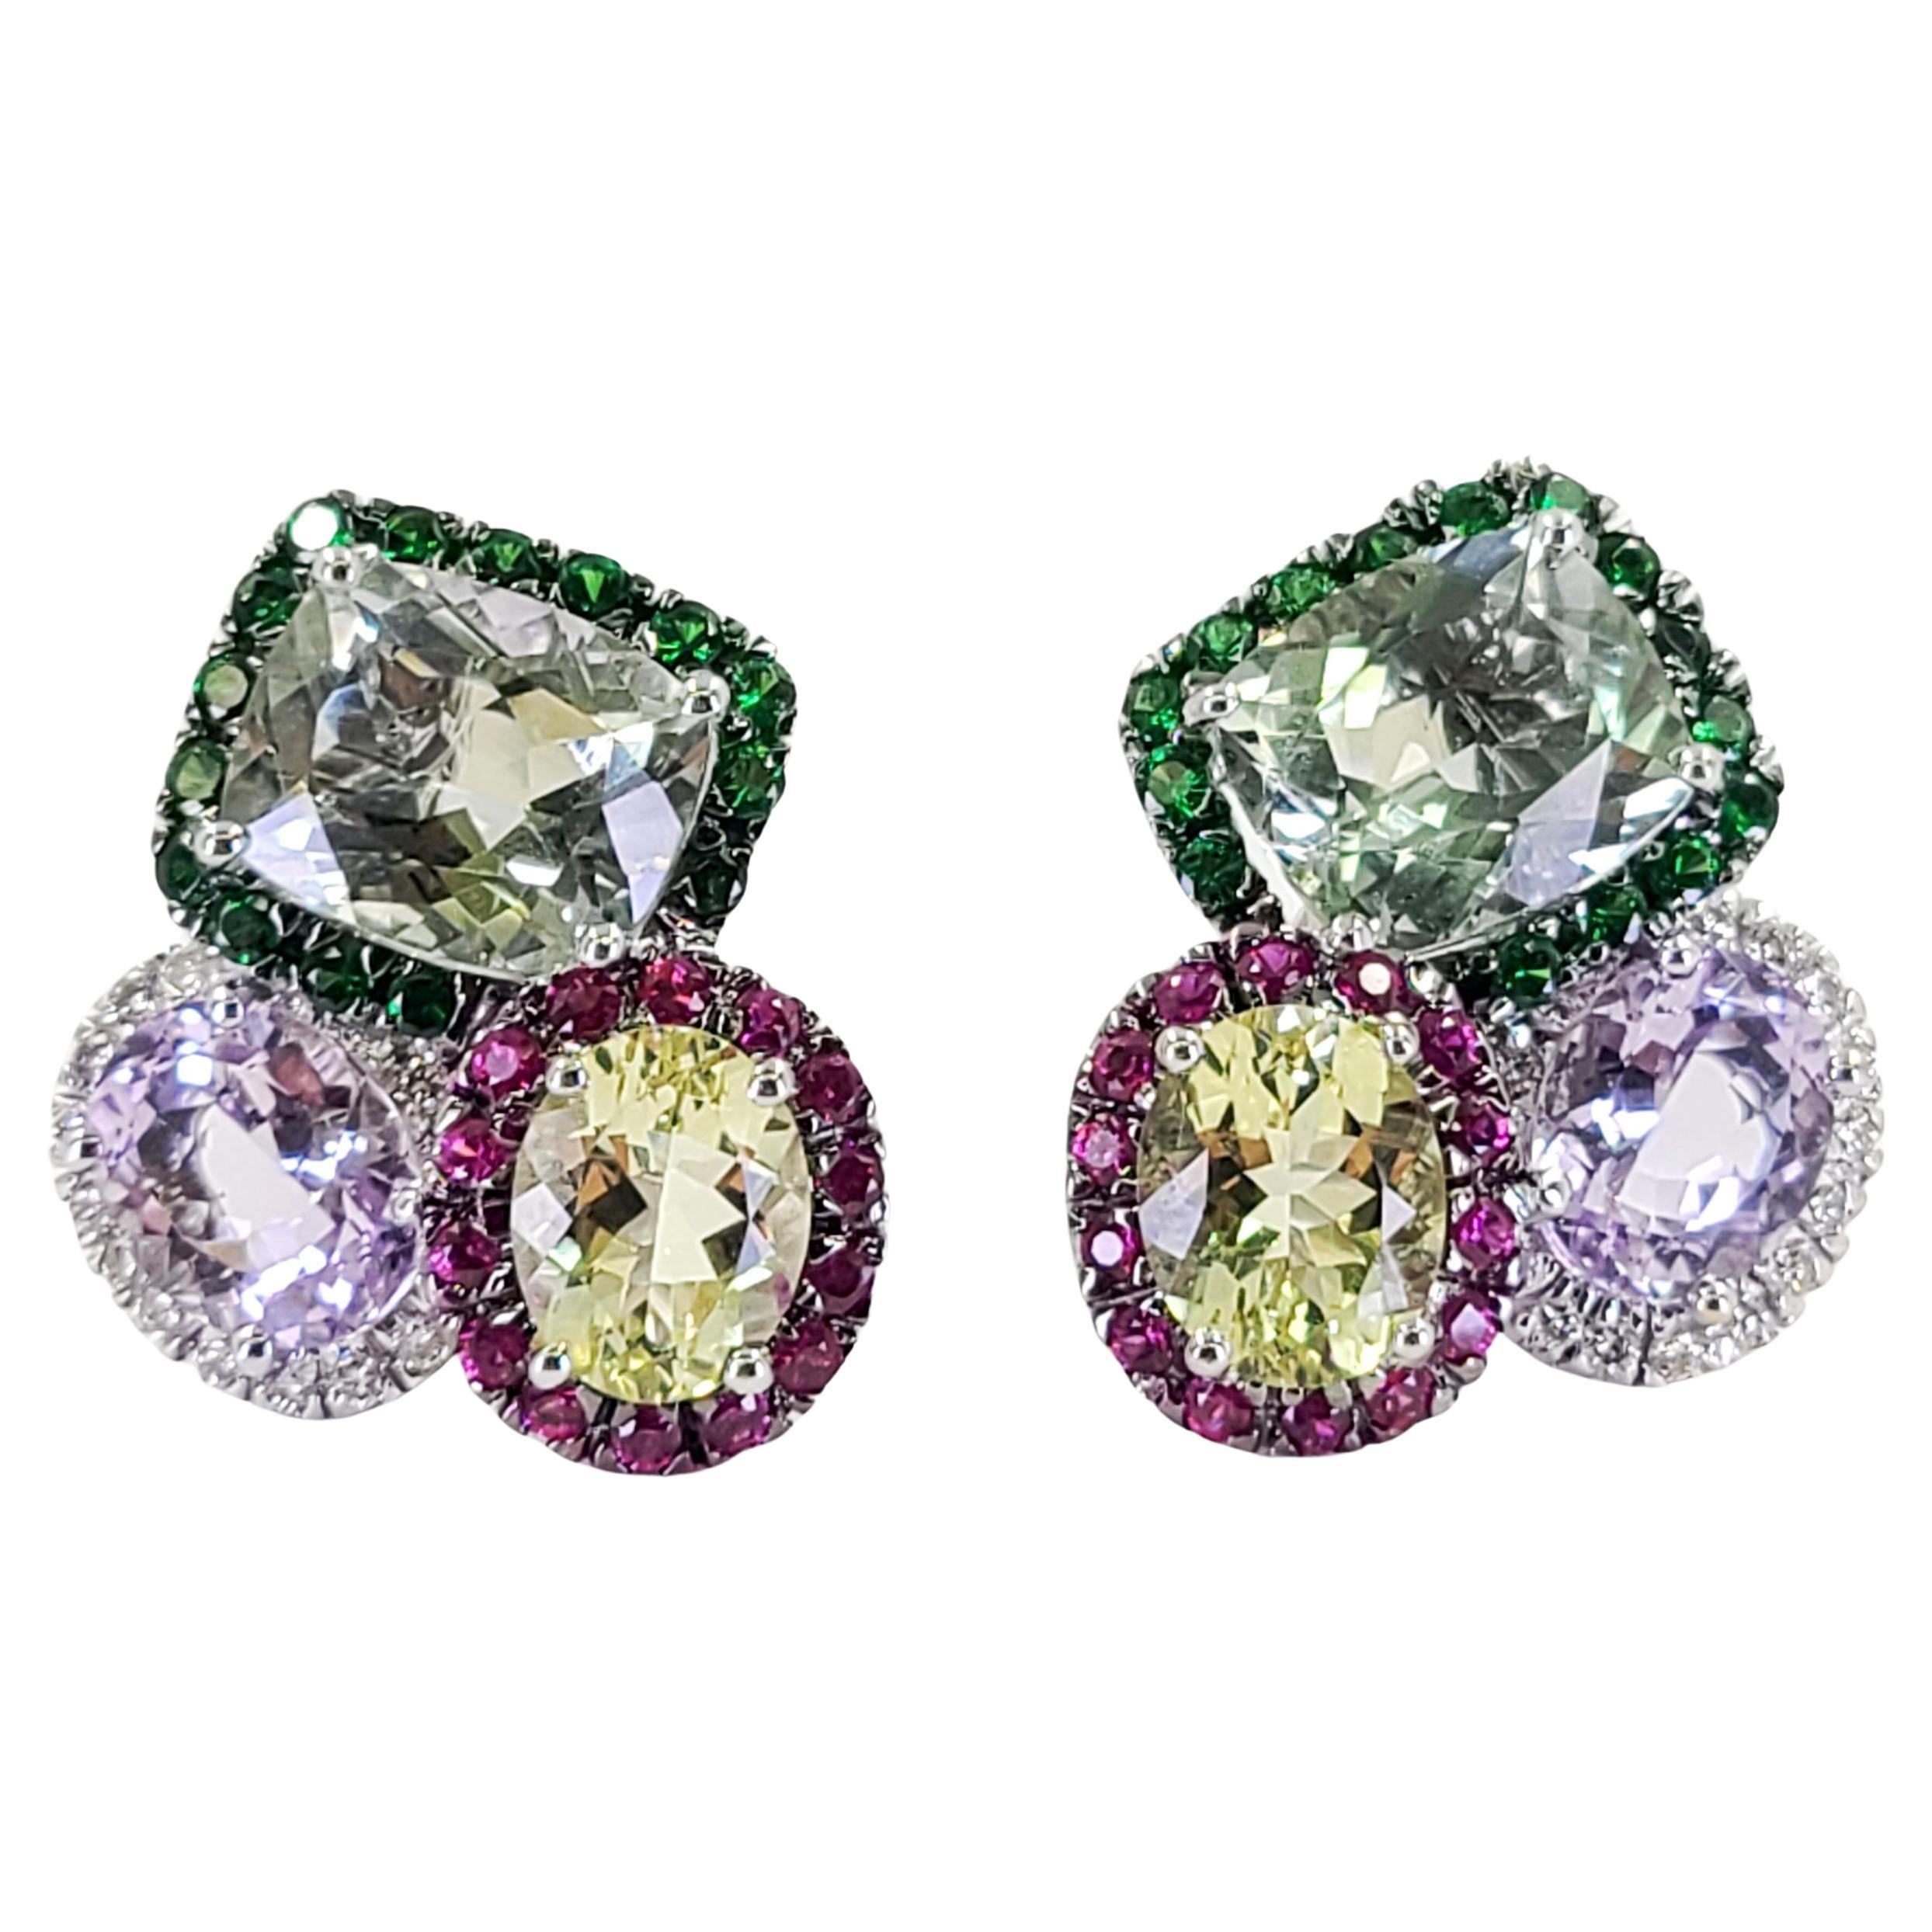 Large White Gold Multicolor Gemstone and Diamond Cocktail Earrings